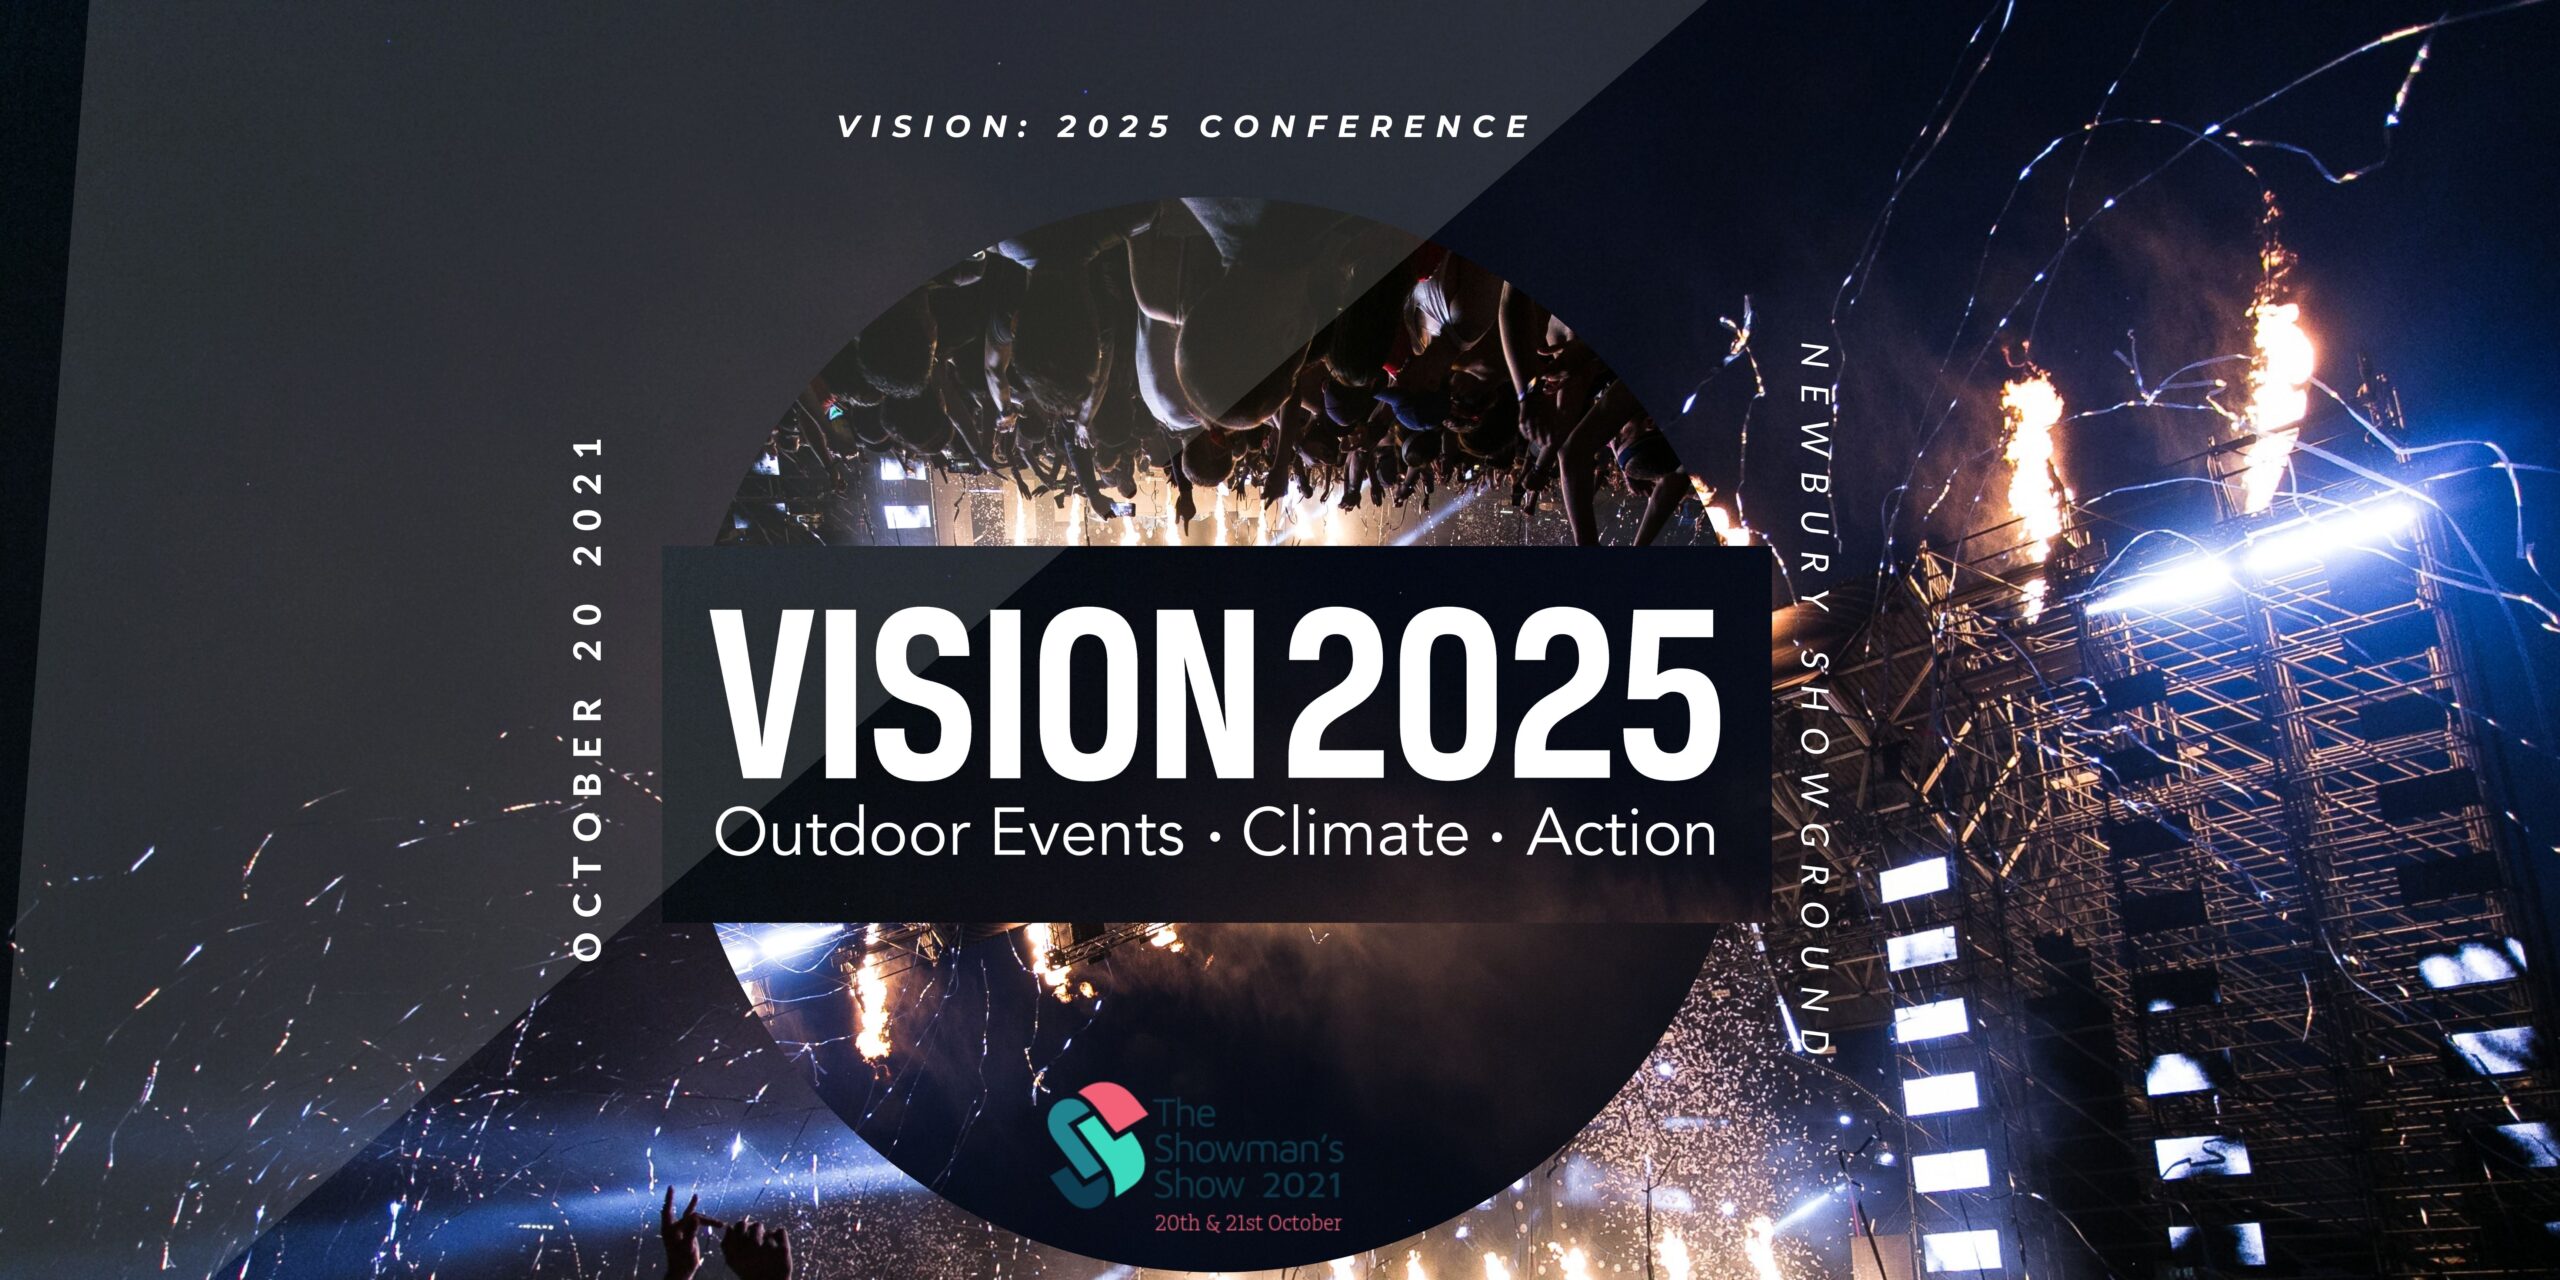 Vision 2025 ‘Journey to Net Zero’ Conference Programme is Live